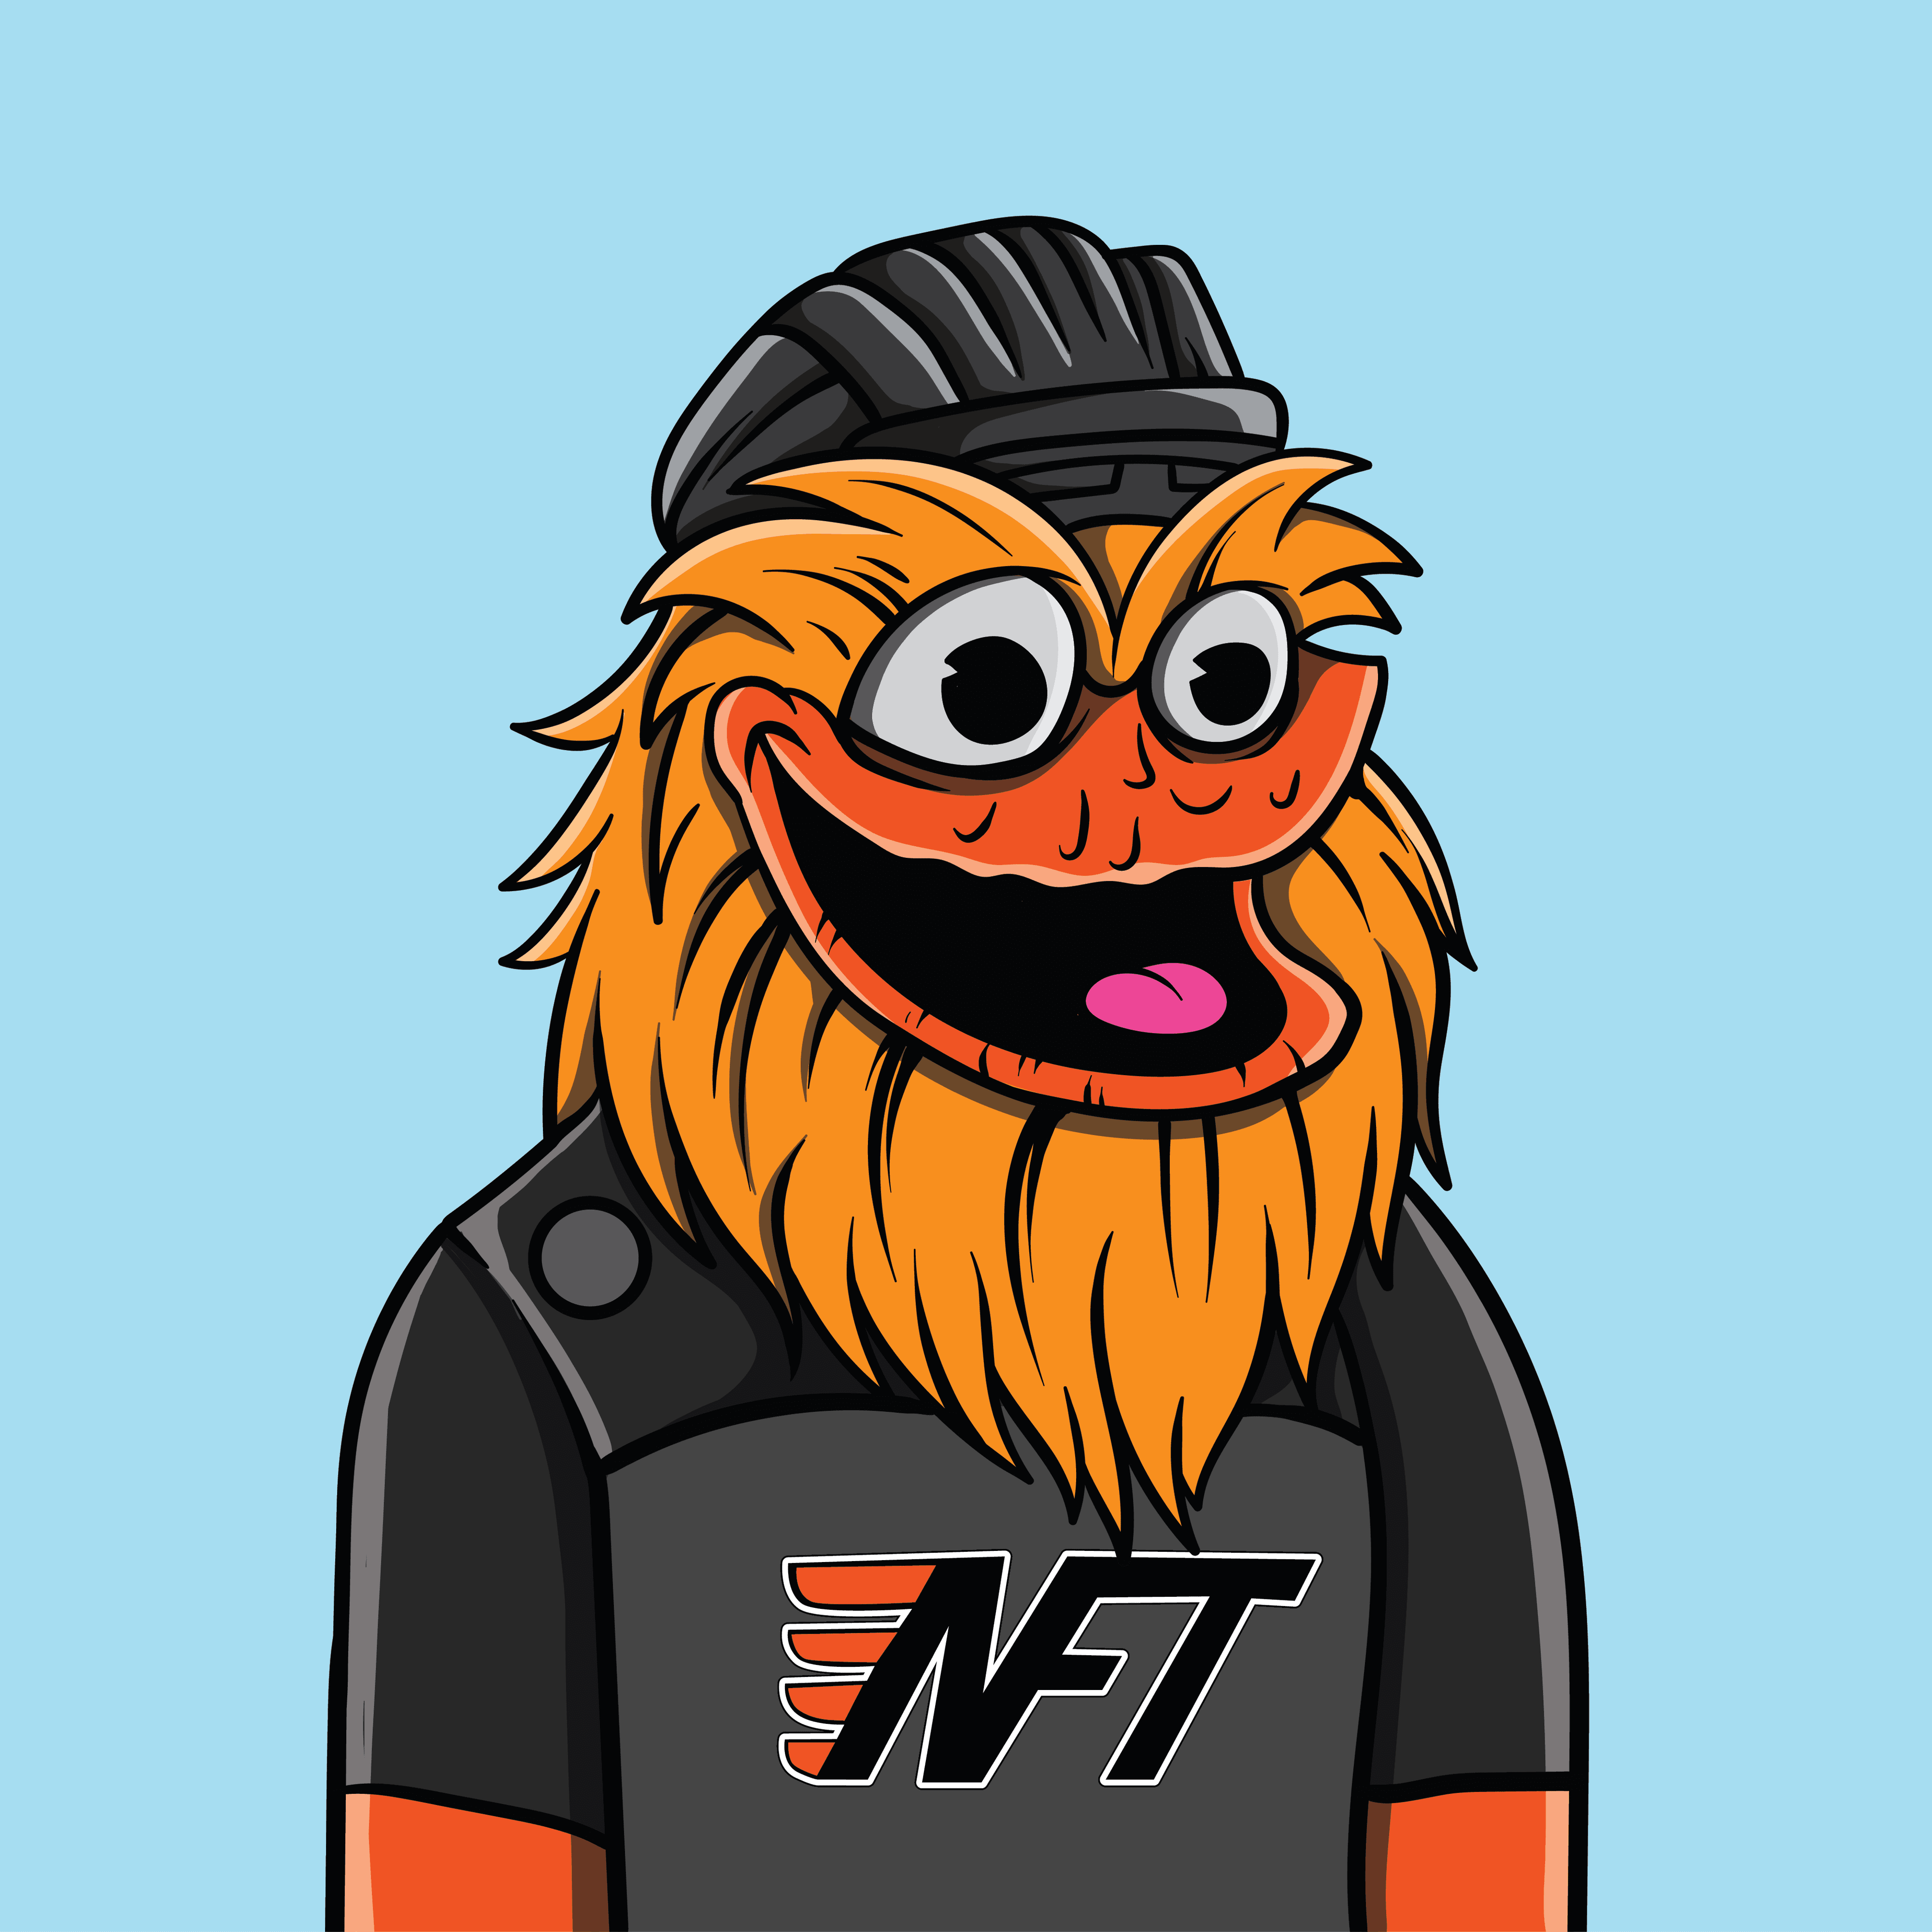 Nifty Gritty